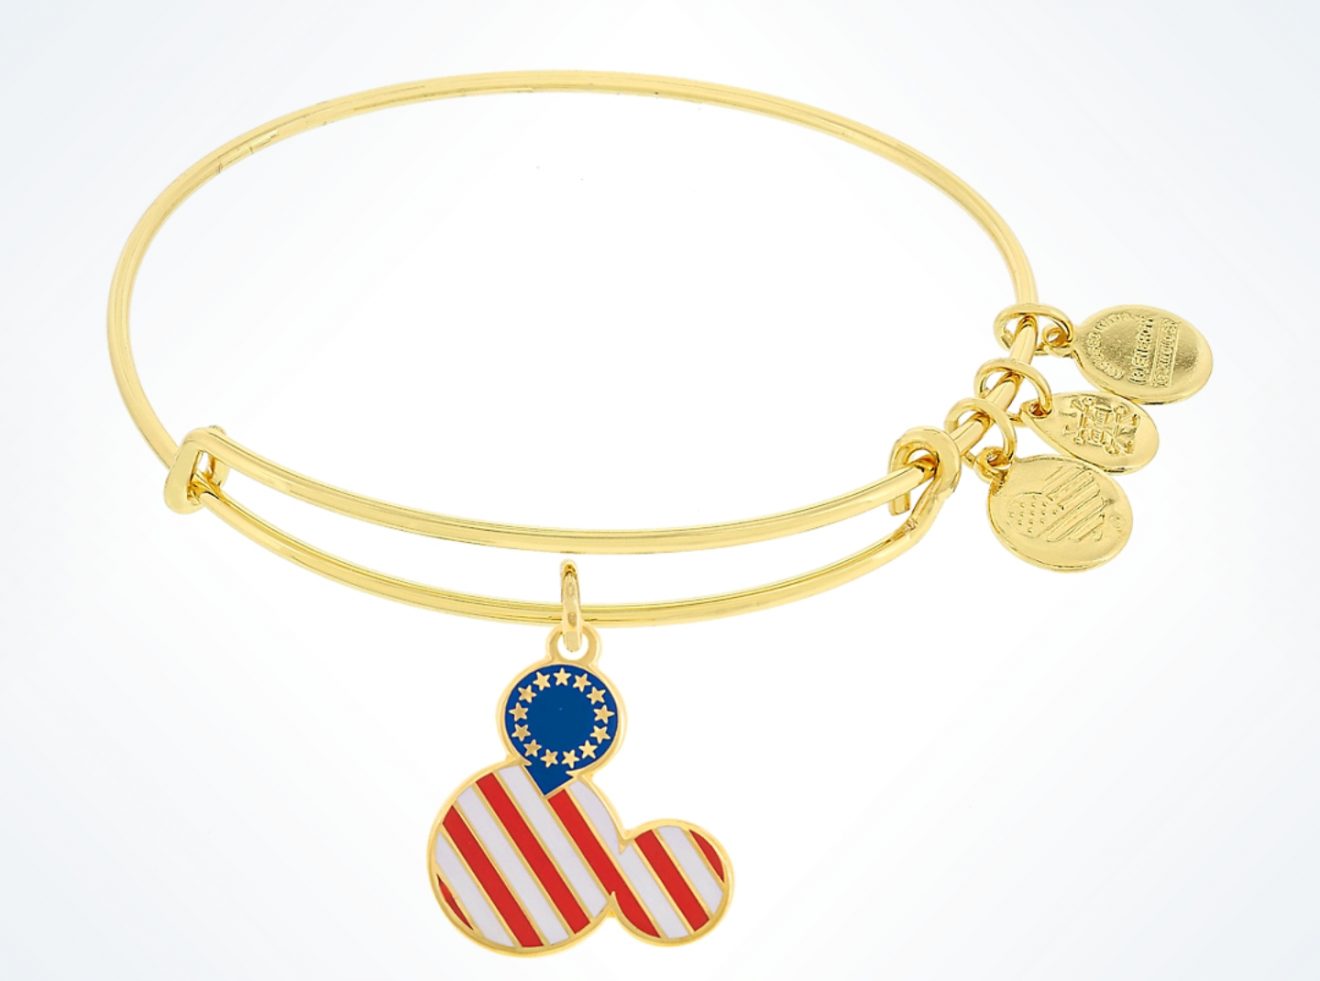 Show Your Pride With New Patriotic Disney Alex and Ani Bangles